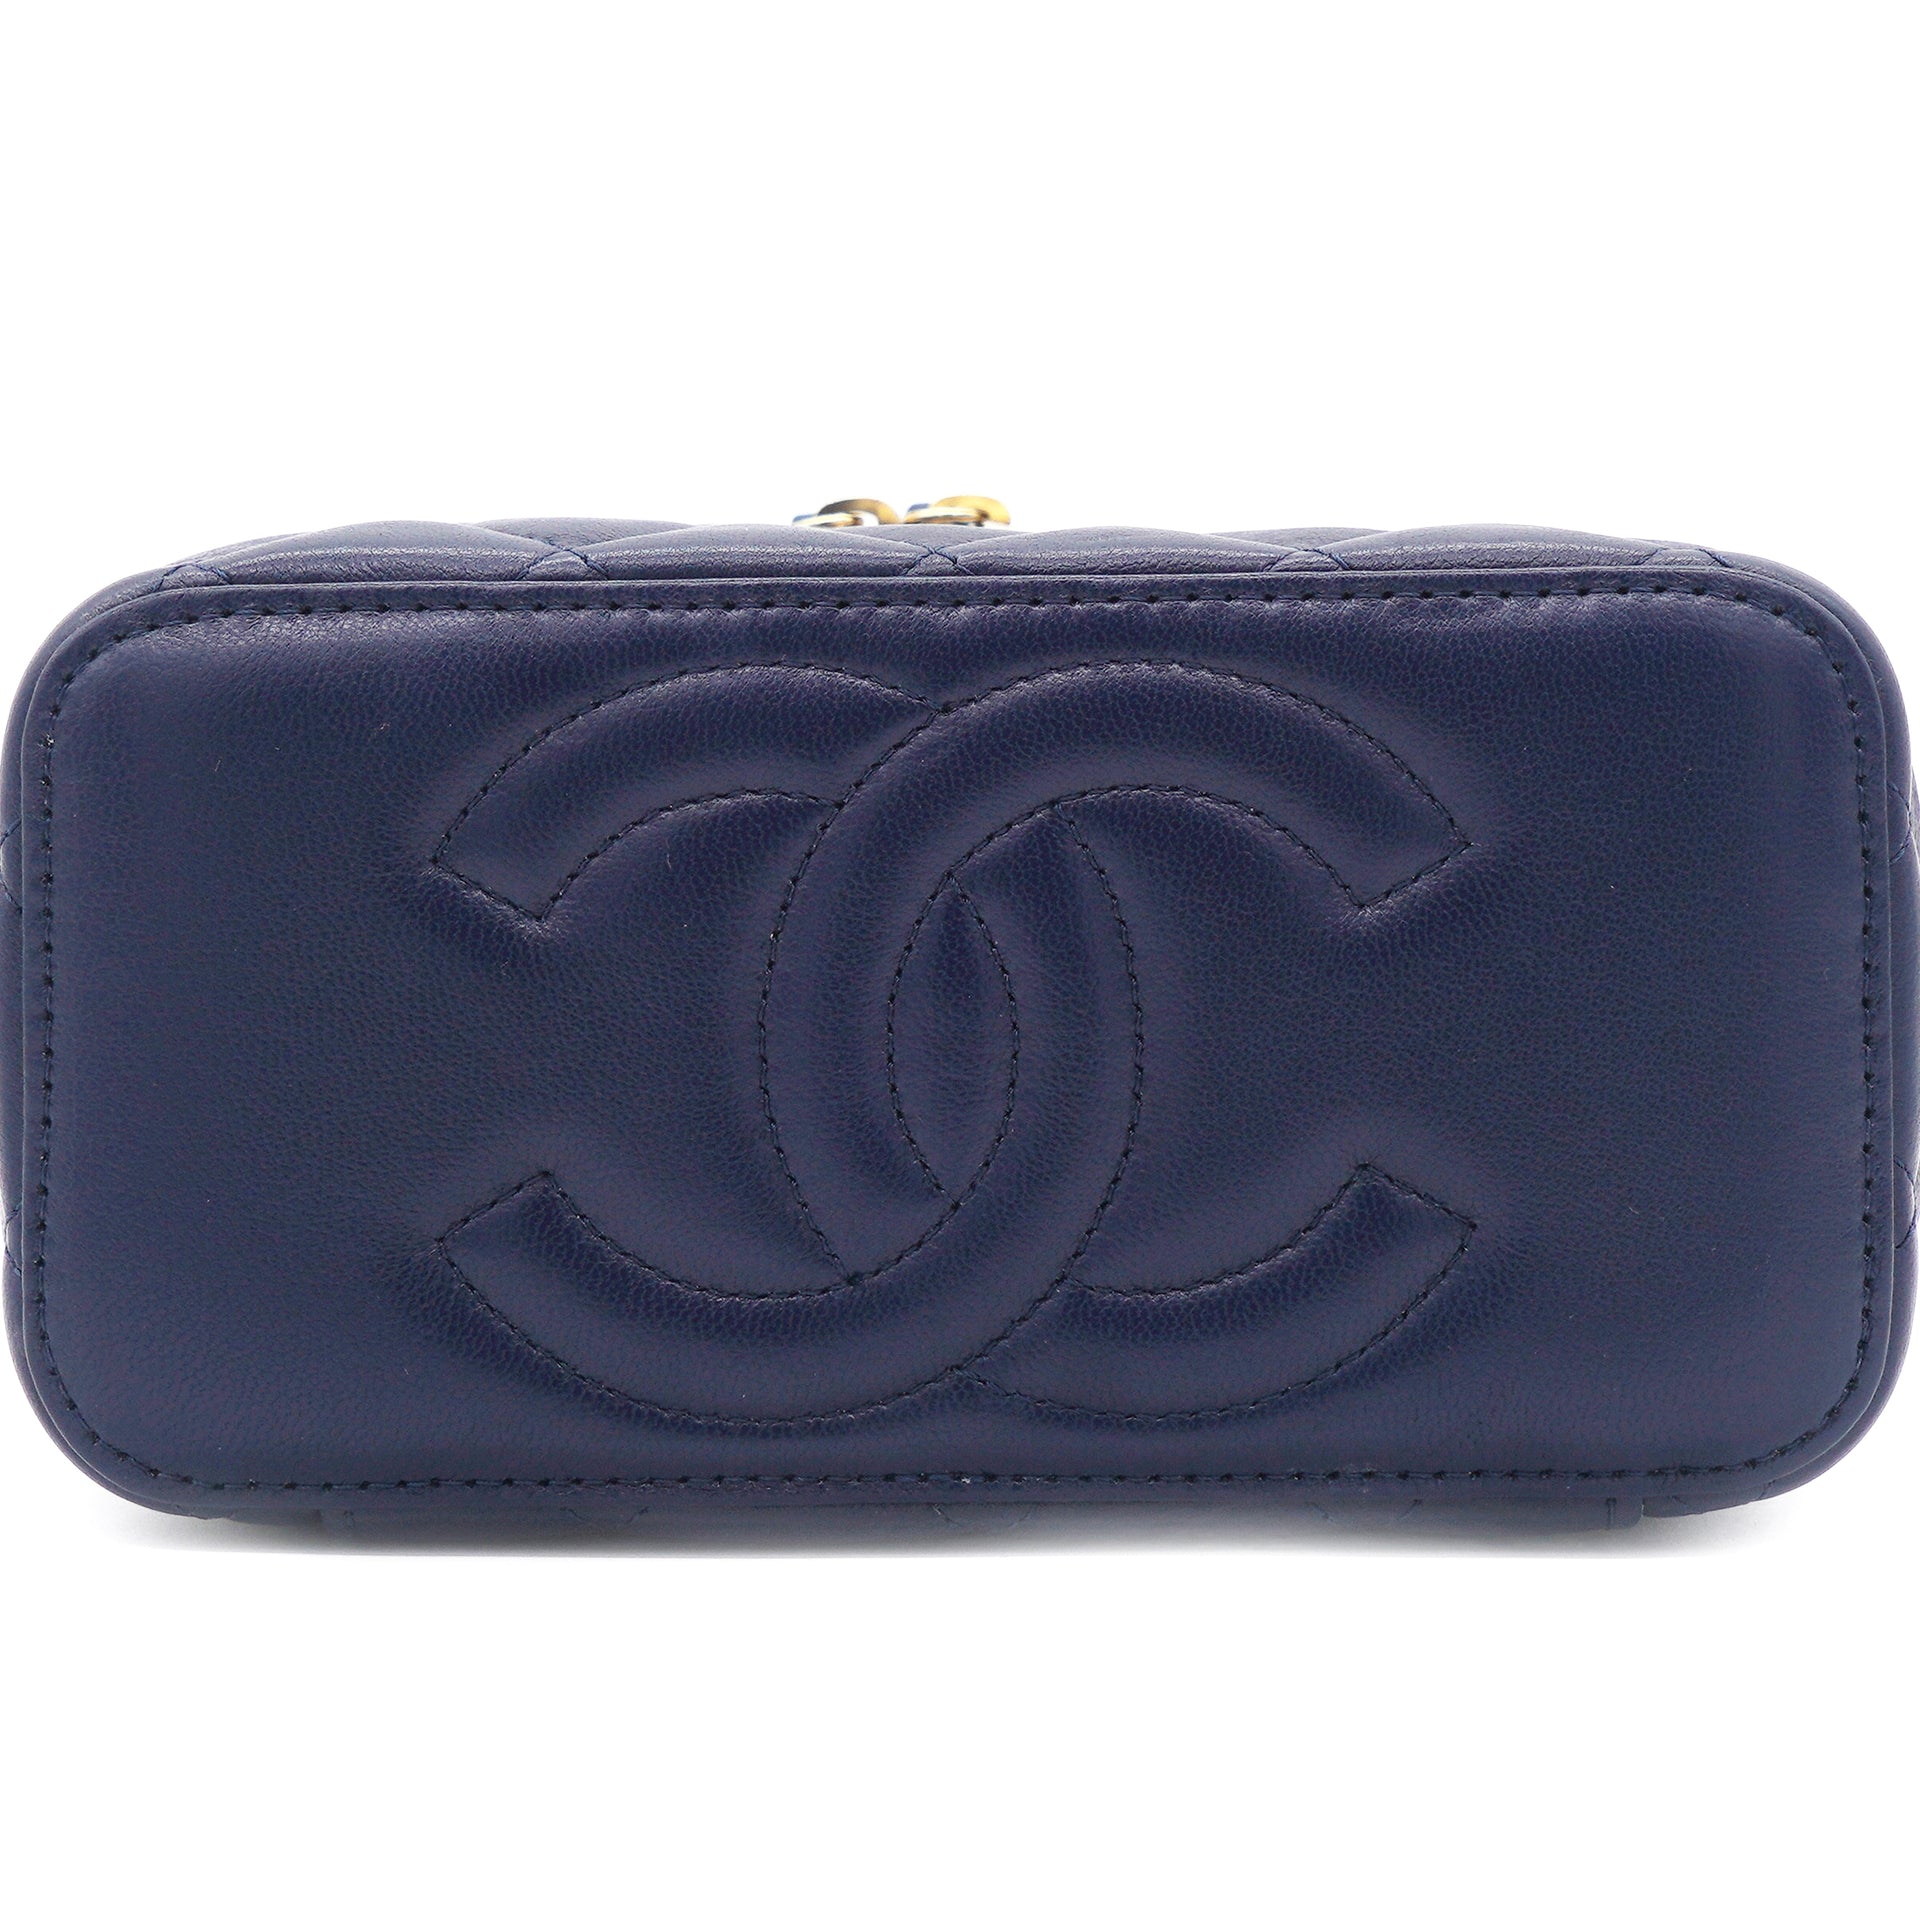 Lambskin Quilted Small Top Handle Vanity Case With Chain Navy